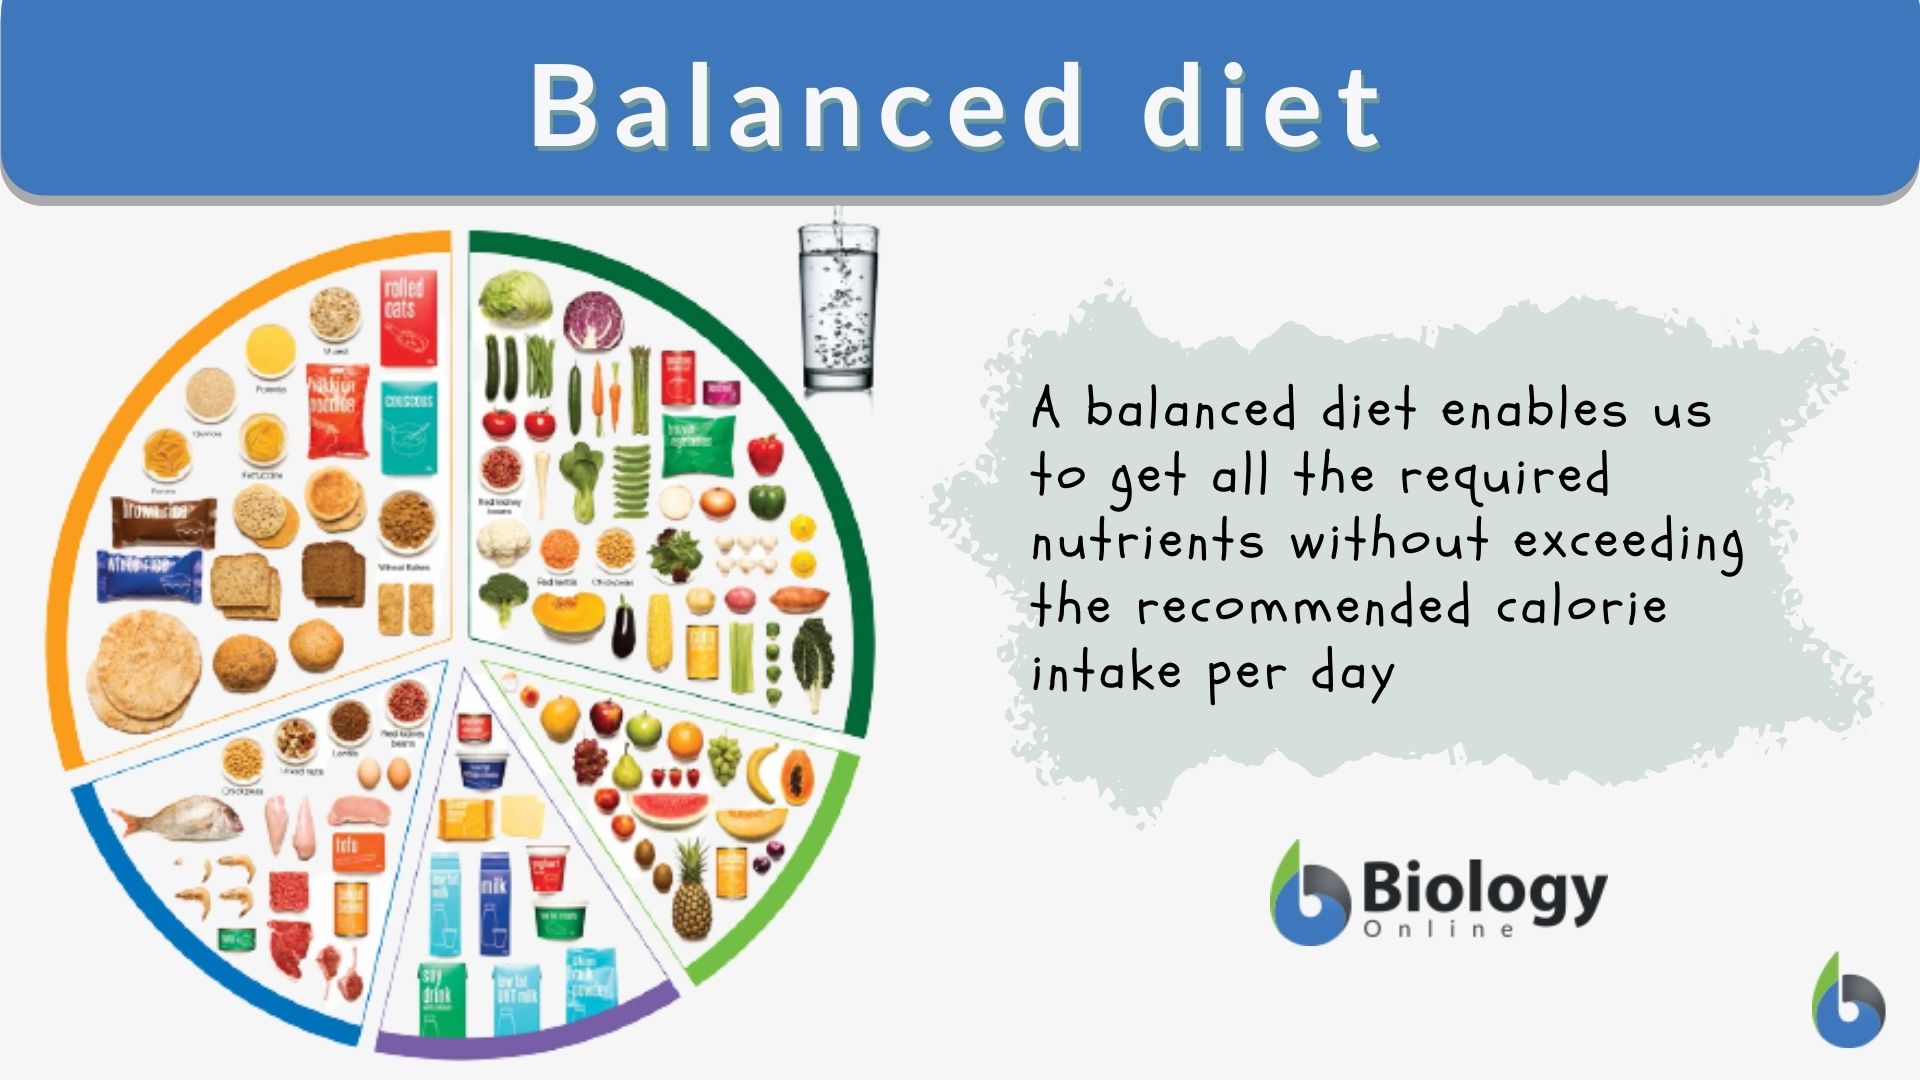 Balanced diet - Definition and Examples - Biology Online Dictionary